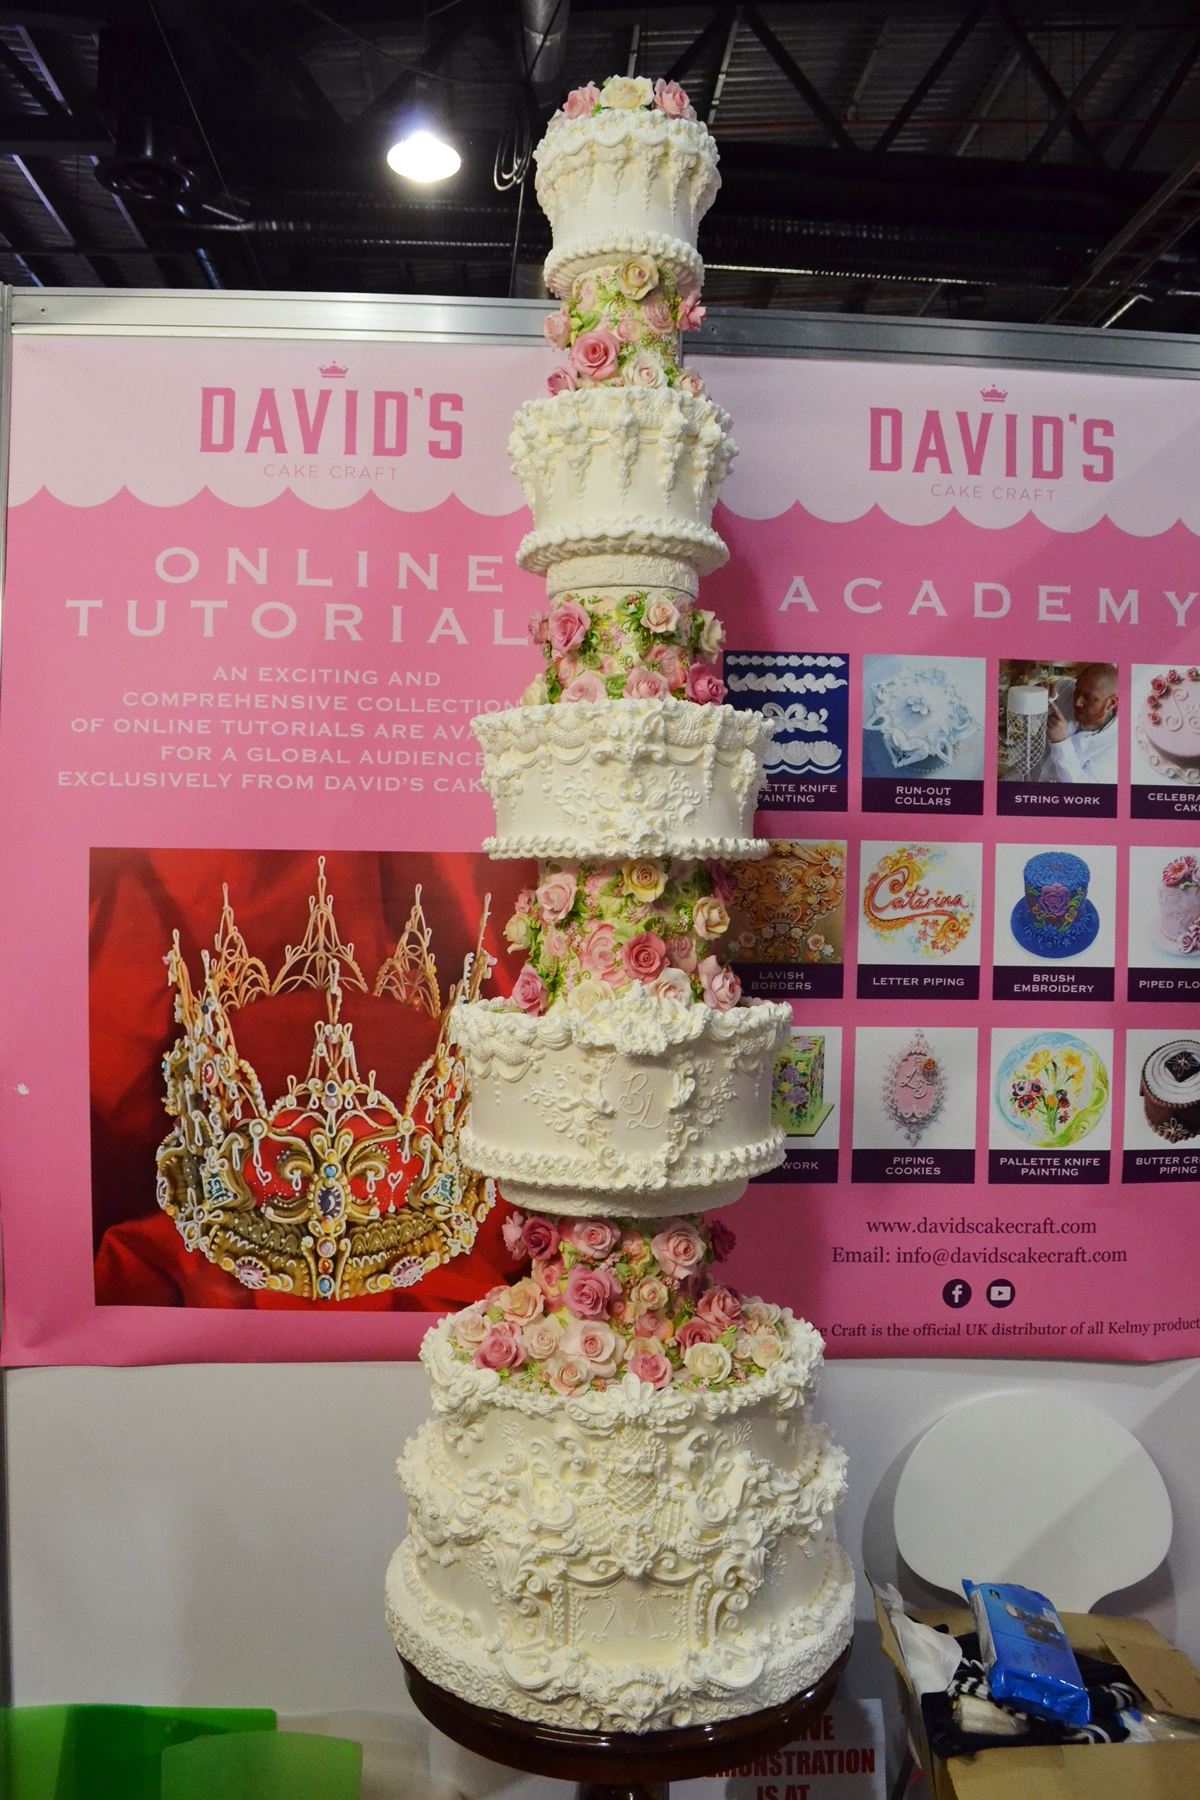 cake and bake show event city manchester 2016 giant wedding cake